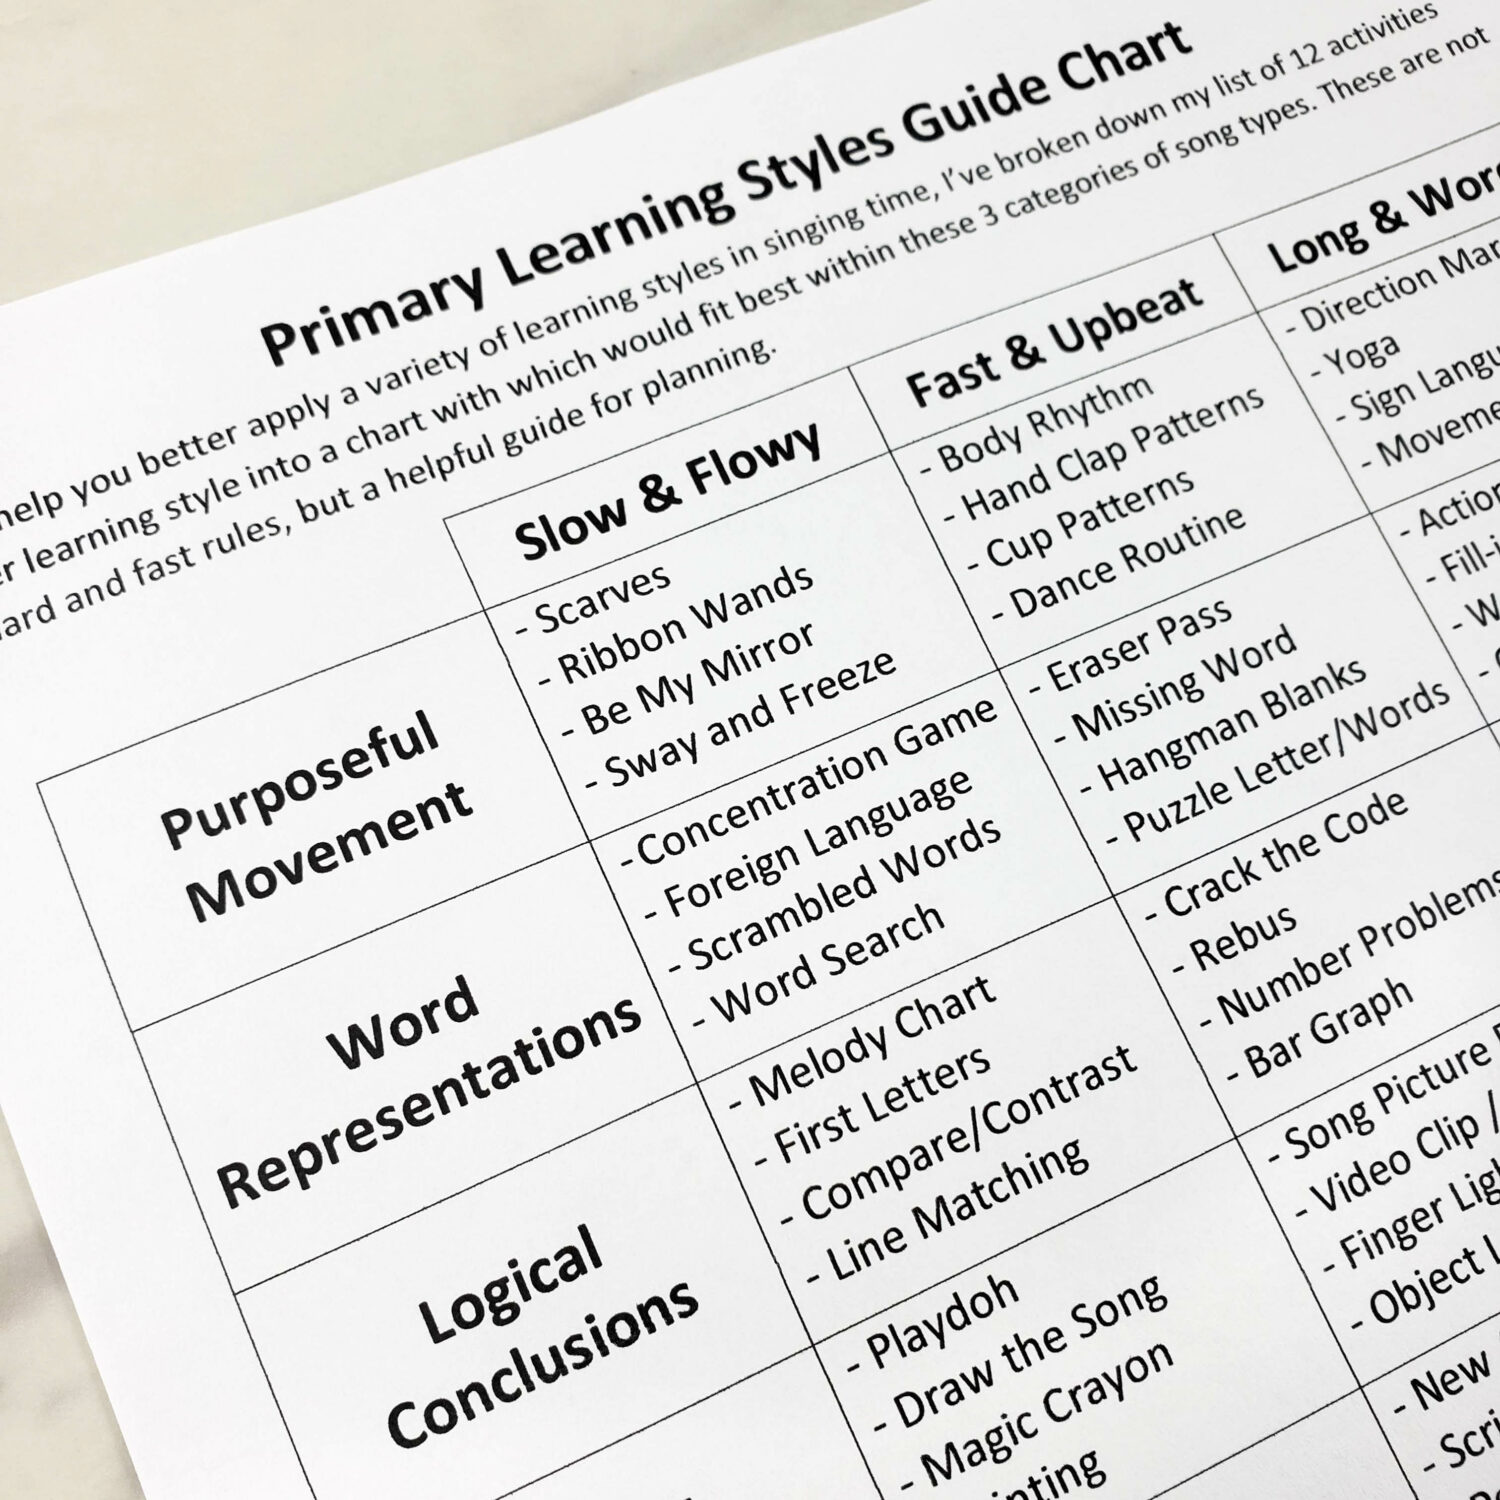 Primary Music learning Styles by Song Type Chart for easy singing time planning with ideas for LDS Primary Music Leaders